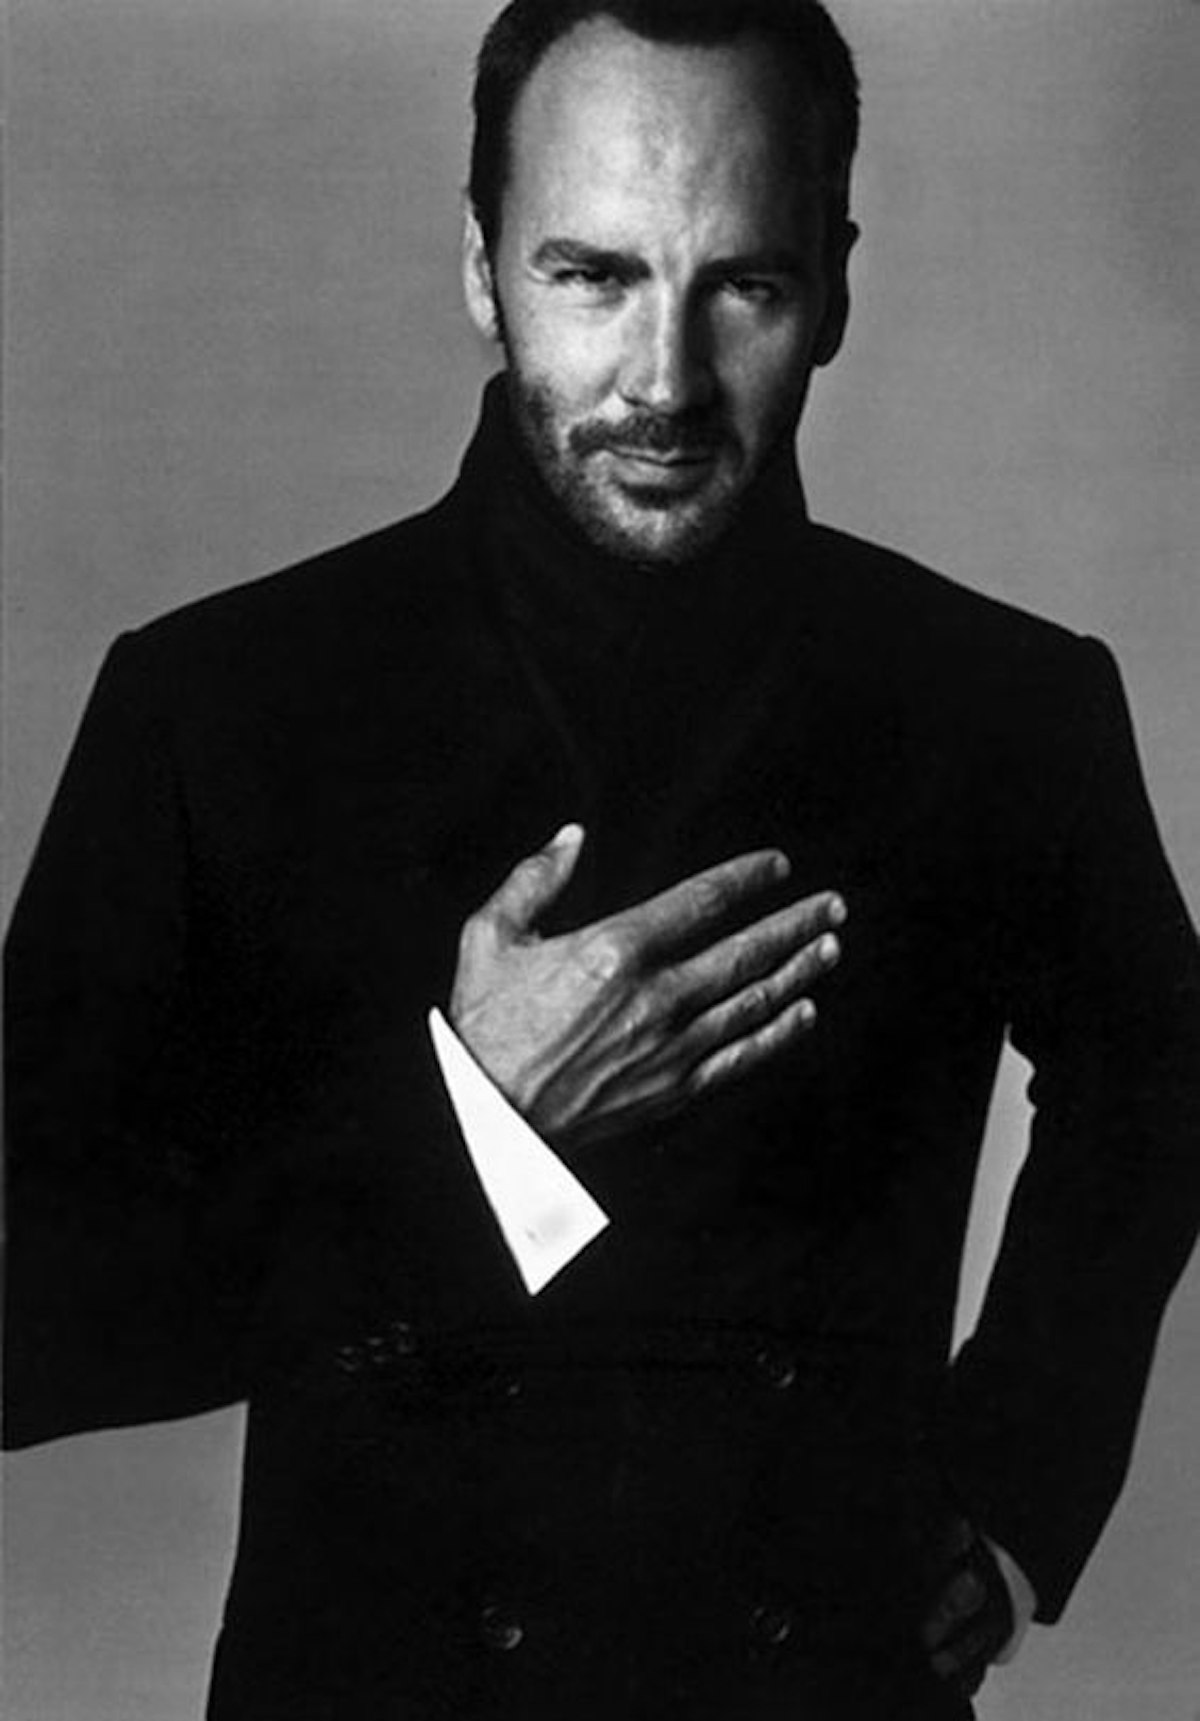 featured image - Tom Ford's Influence on Fashion, Creativity and Mental Health